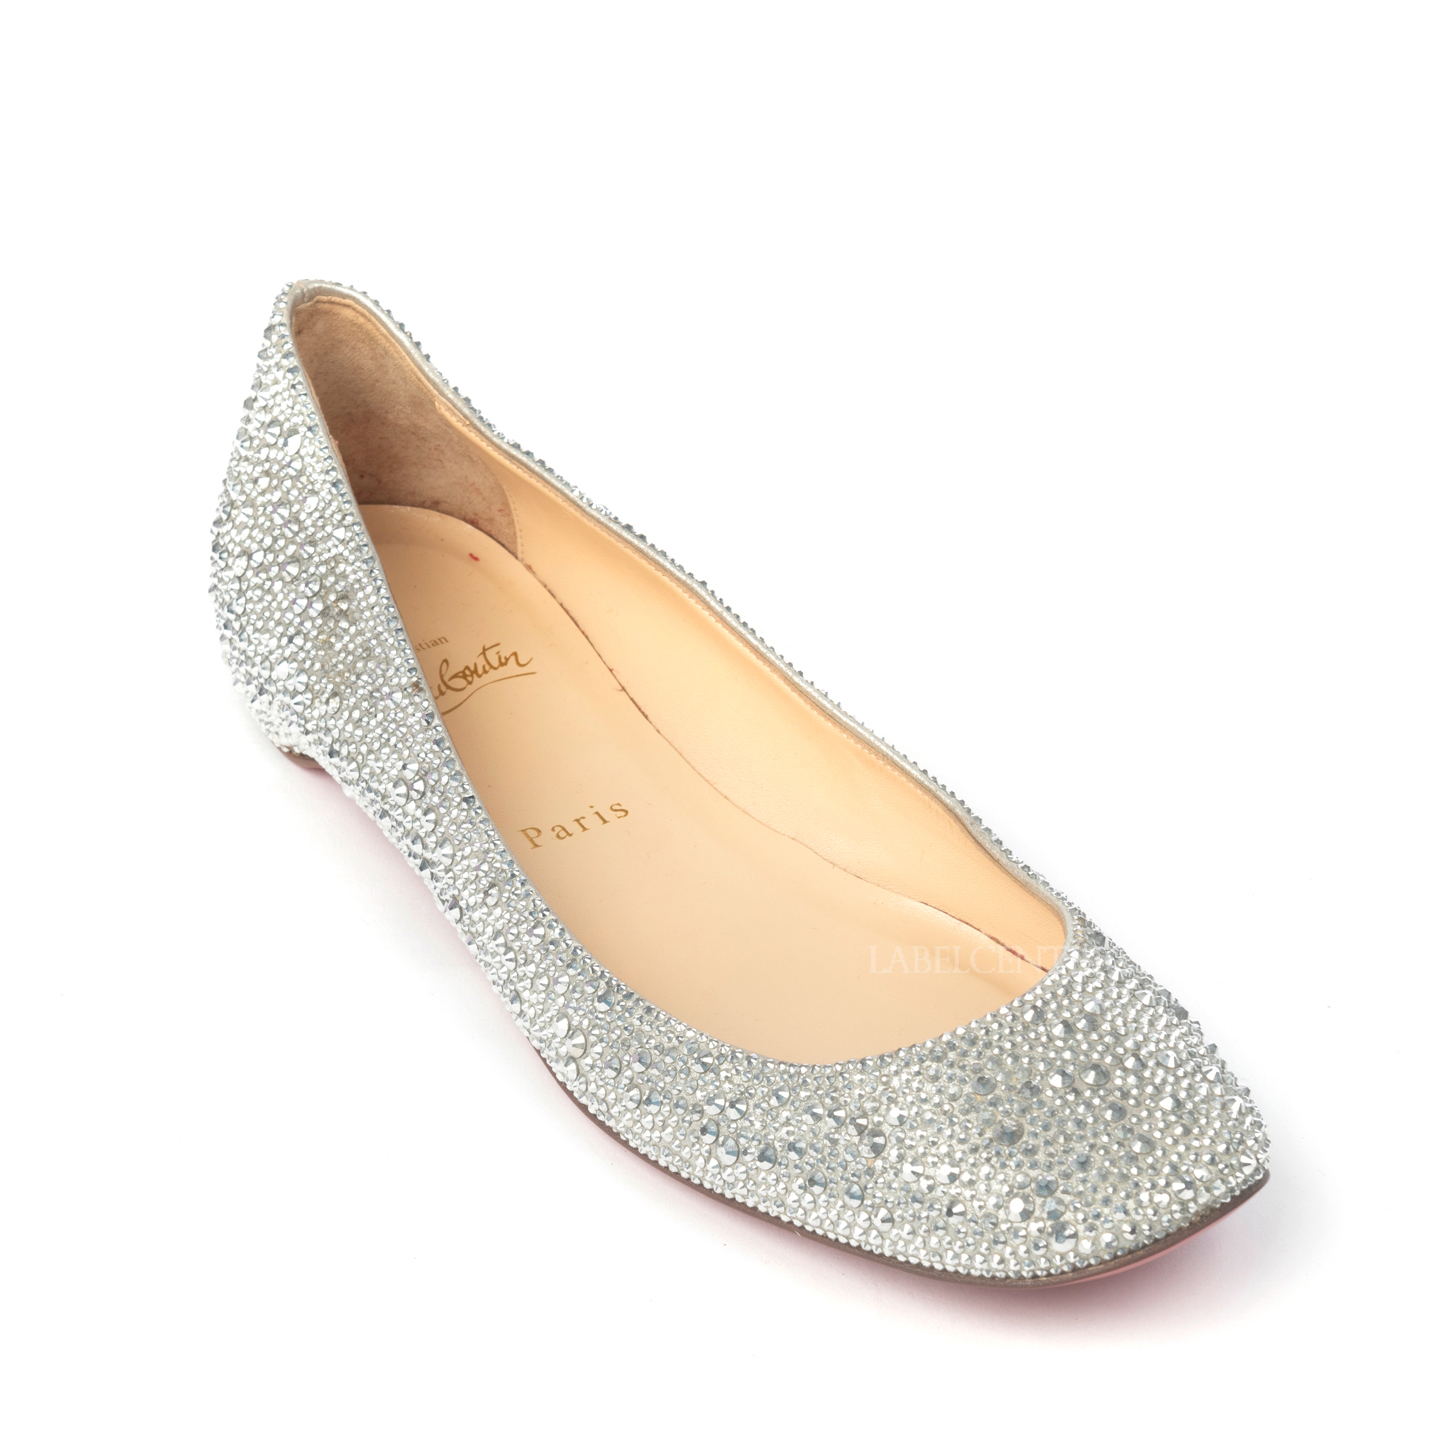 Christian Louboutin Gozul Strass Crystal Encrusted Ballet Flats, Size 39 - LabelCentric